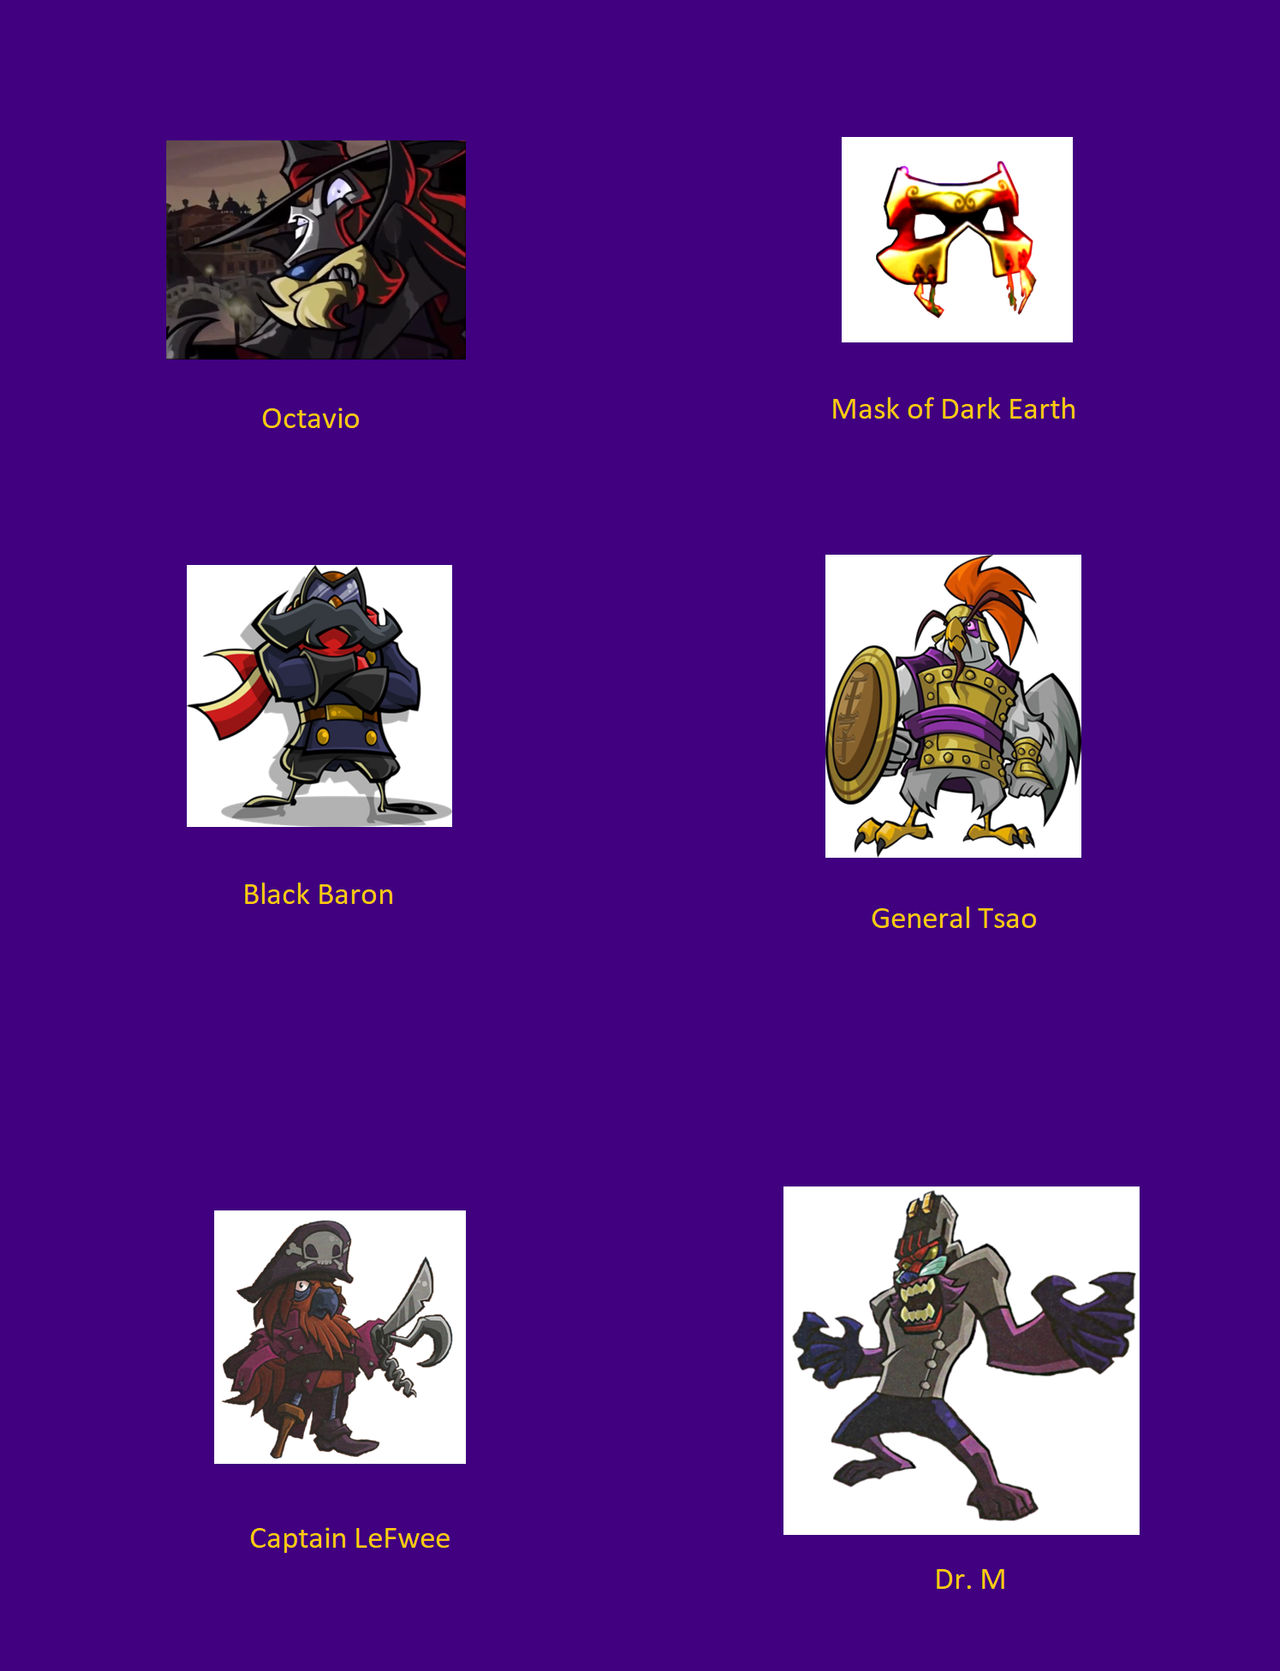 Sly Cooper 3 Villains by Mdwyer5 on DeviantArt